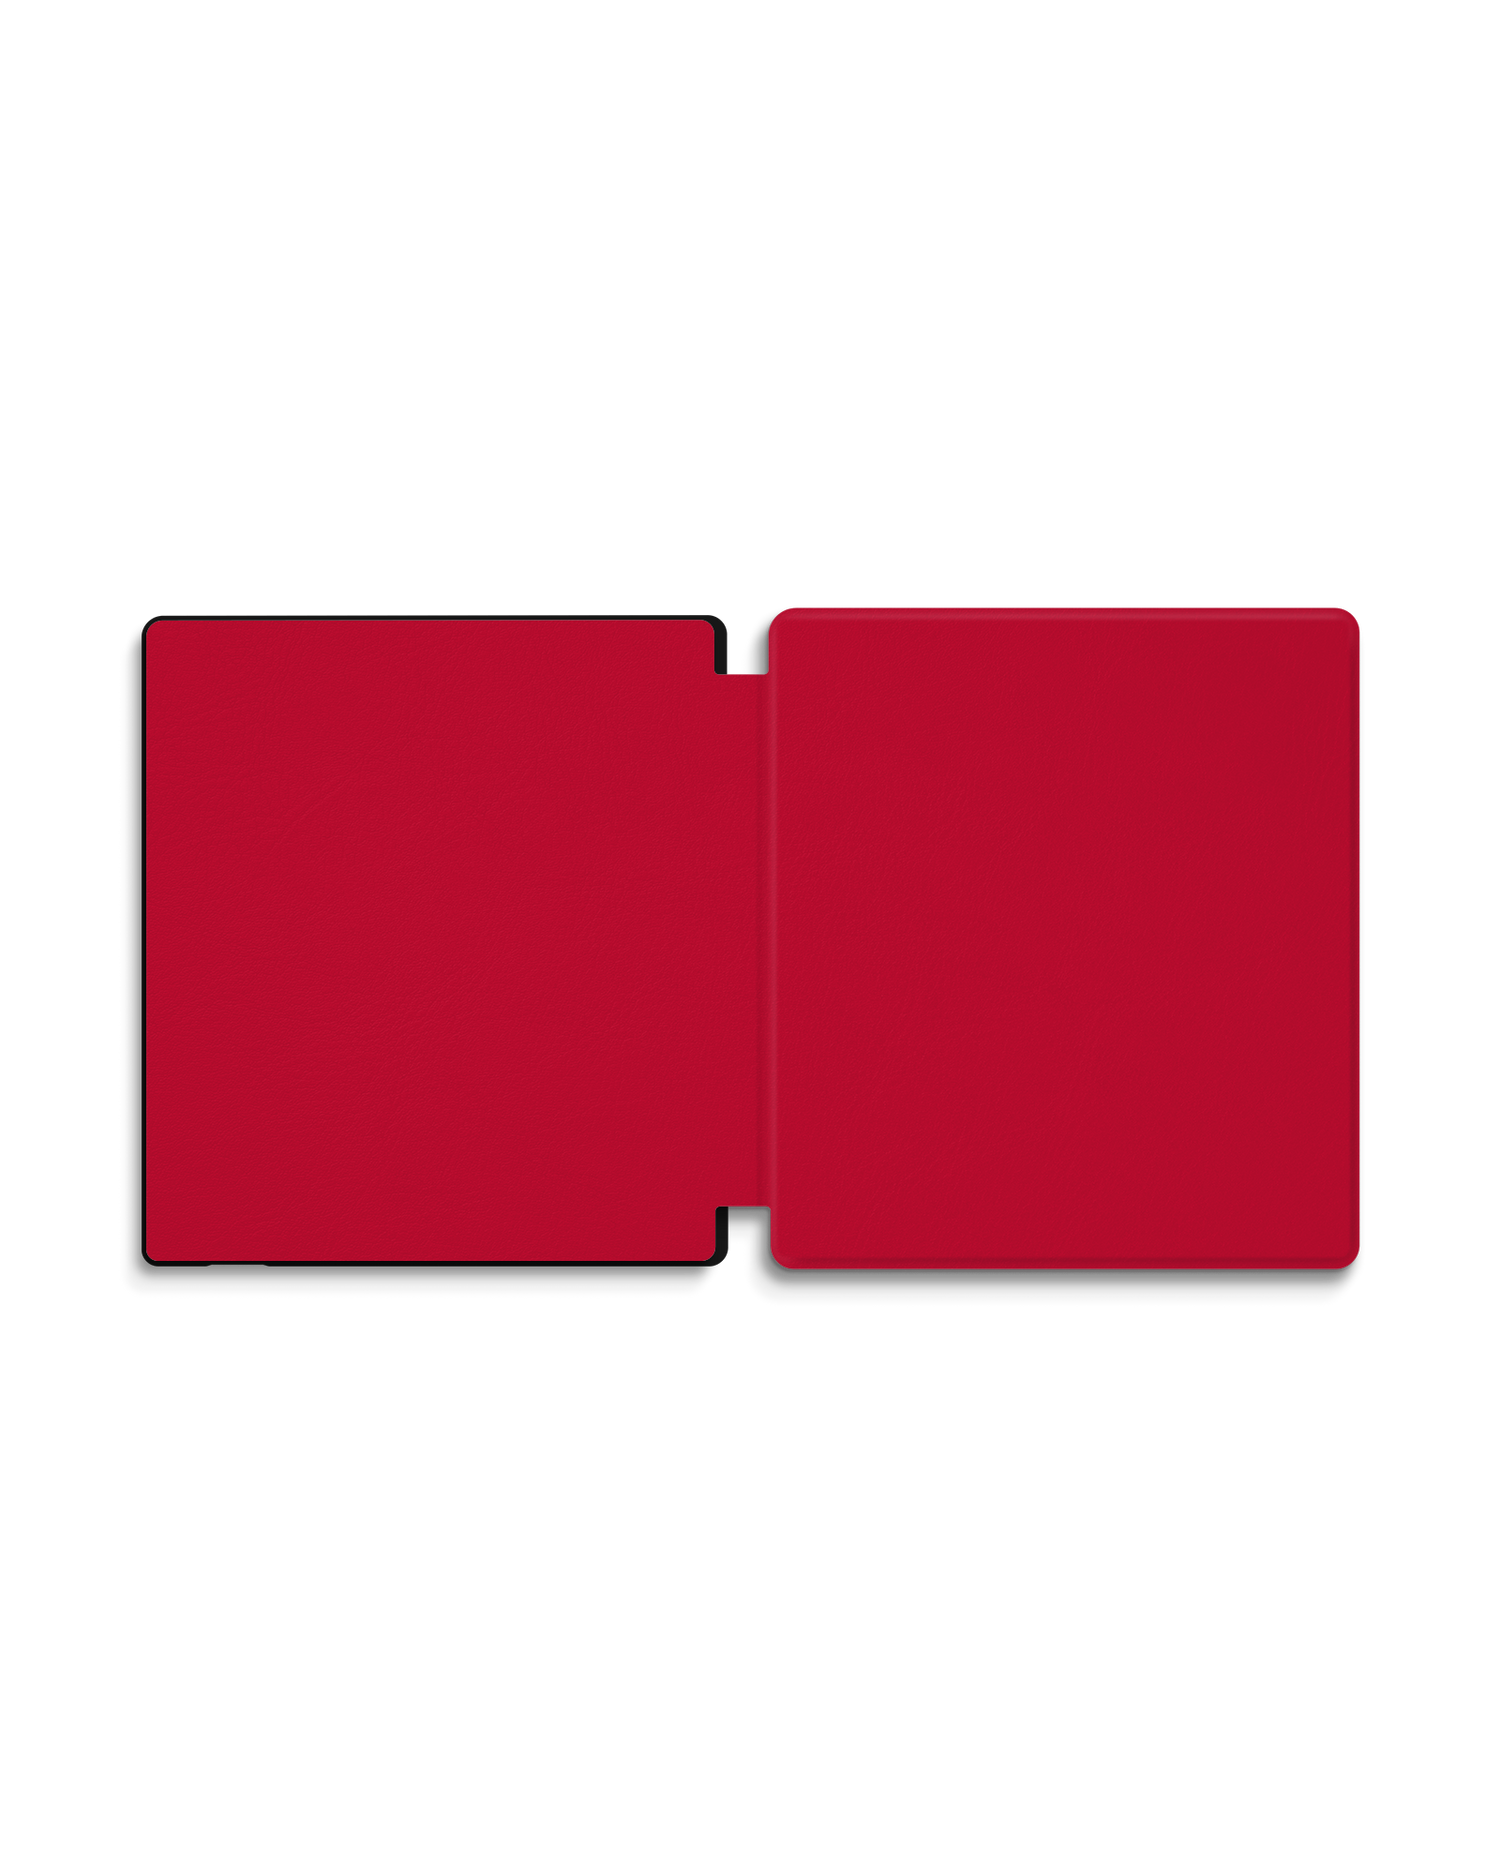 RED eReader Smart Case for Amazon Kindle Oasis: Opened exterior view